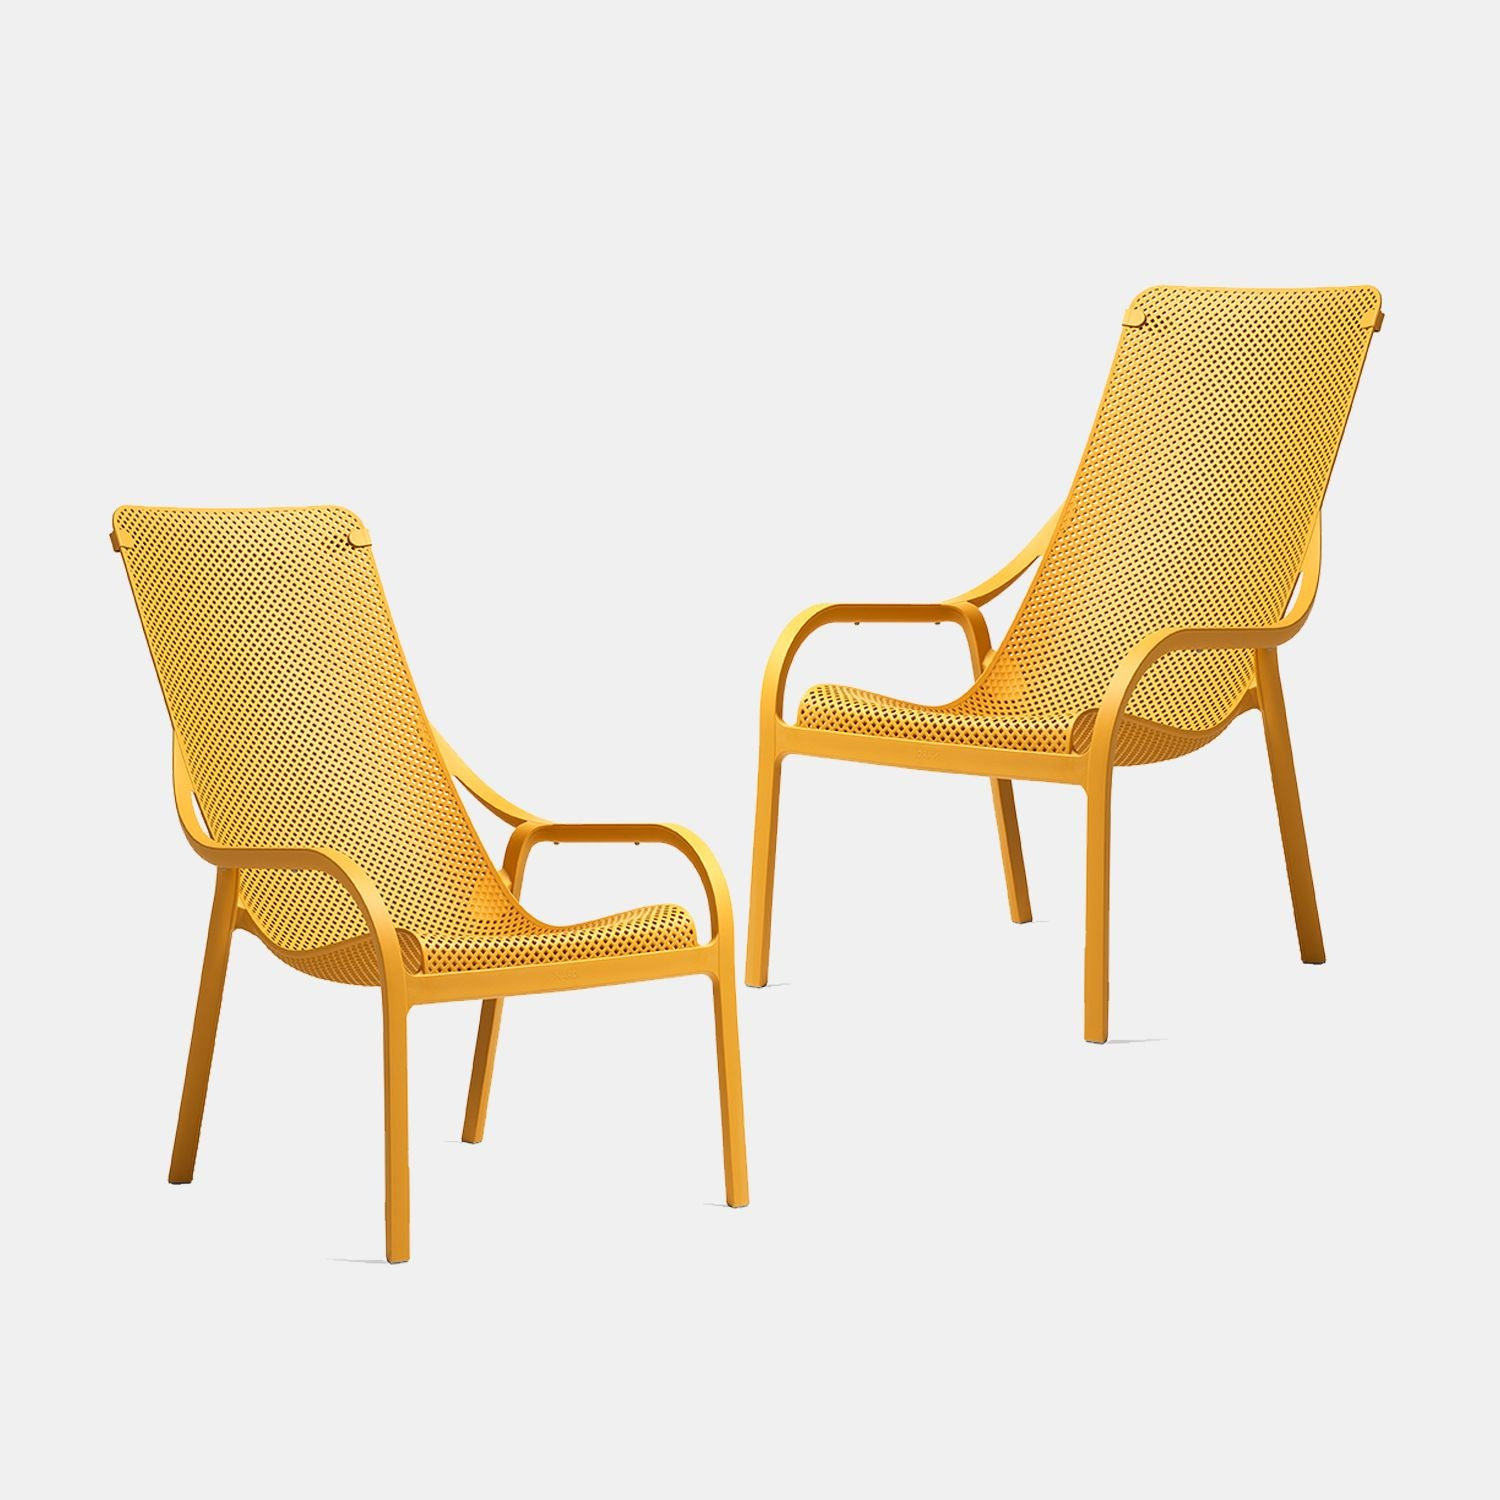 Net Lounge Chairs By Nardi Outdoor In Mustard Finish